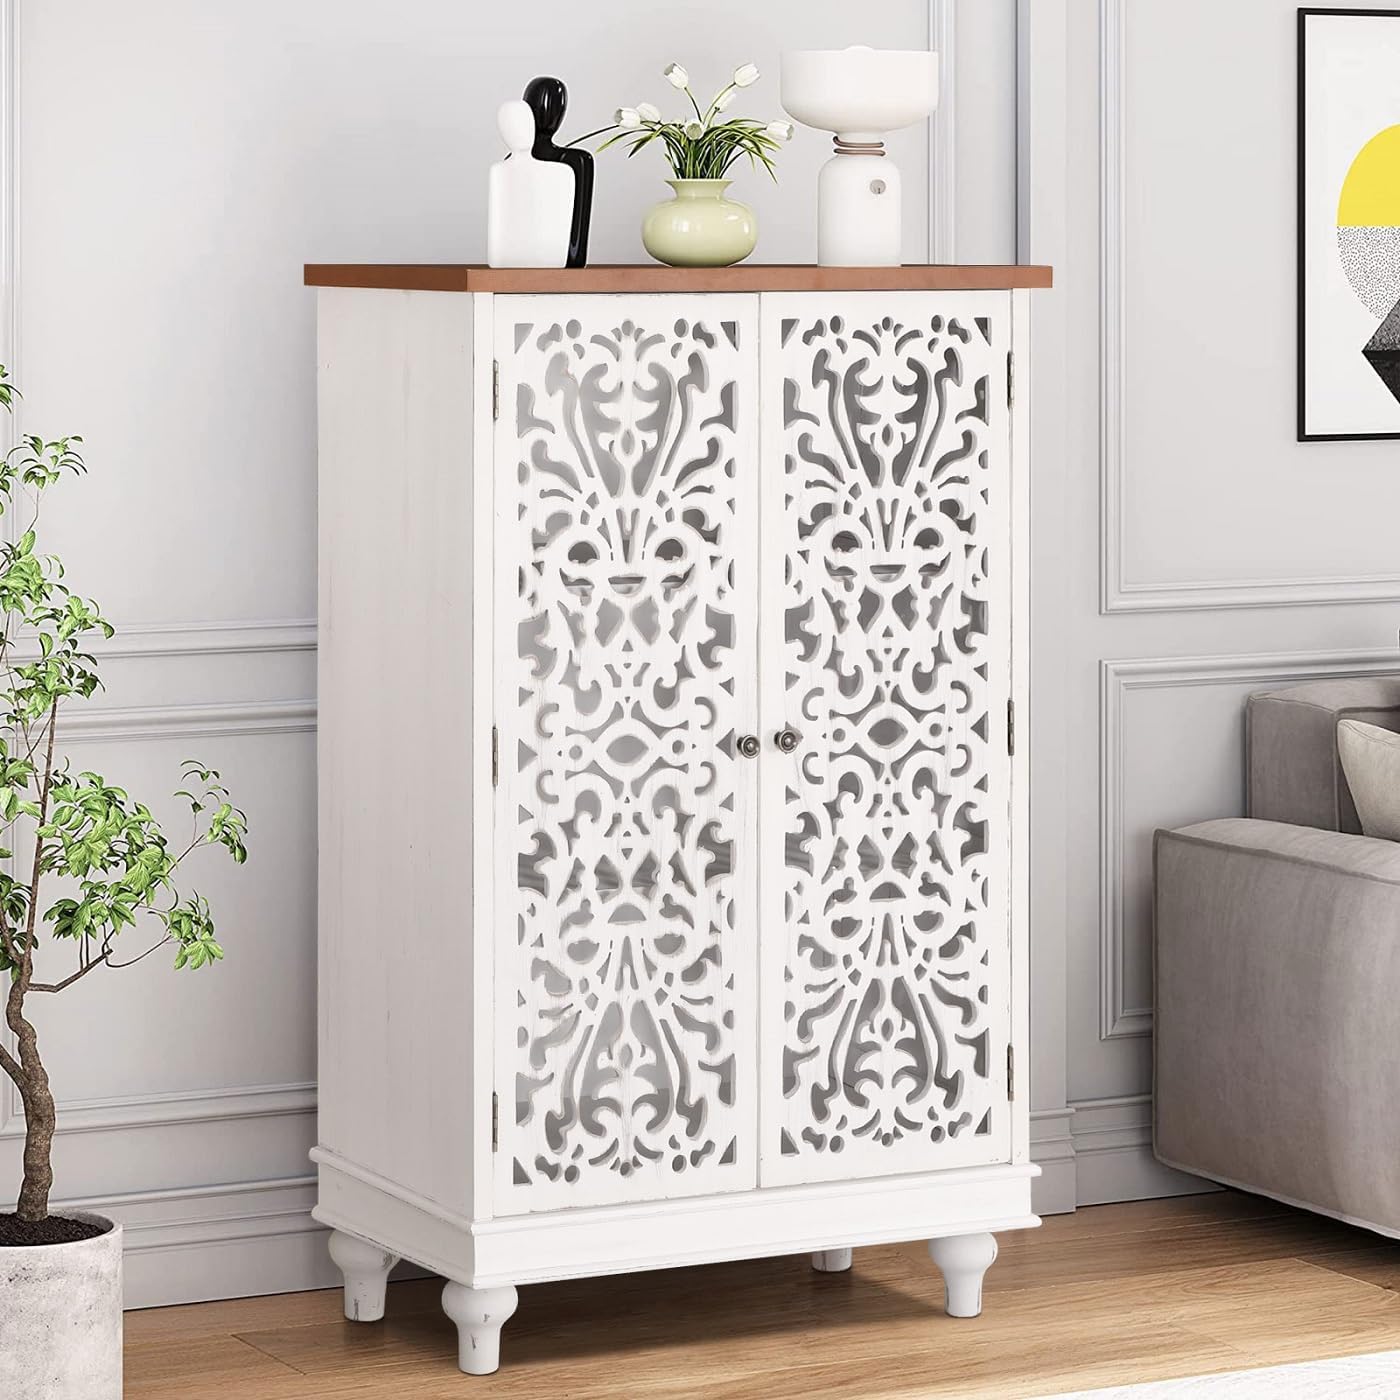 MFSTUDIO Accent Tall Wood Storage Cabinet Buffet Sideboard Hollow-Carved Floral 2 Doors Distressed Decorative for Living Room Kitchen Stand Entryway Hallway, 13.8 Dx31.5 Wx47.4 H, White